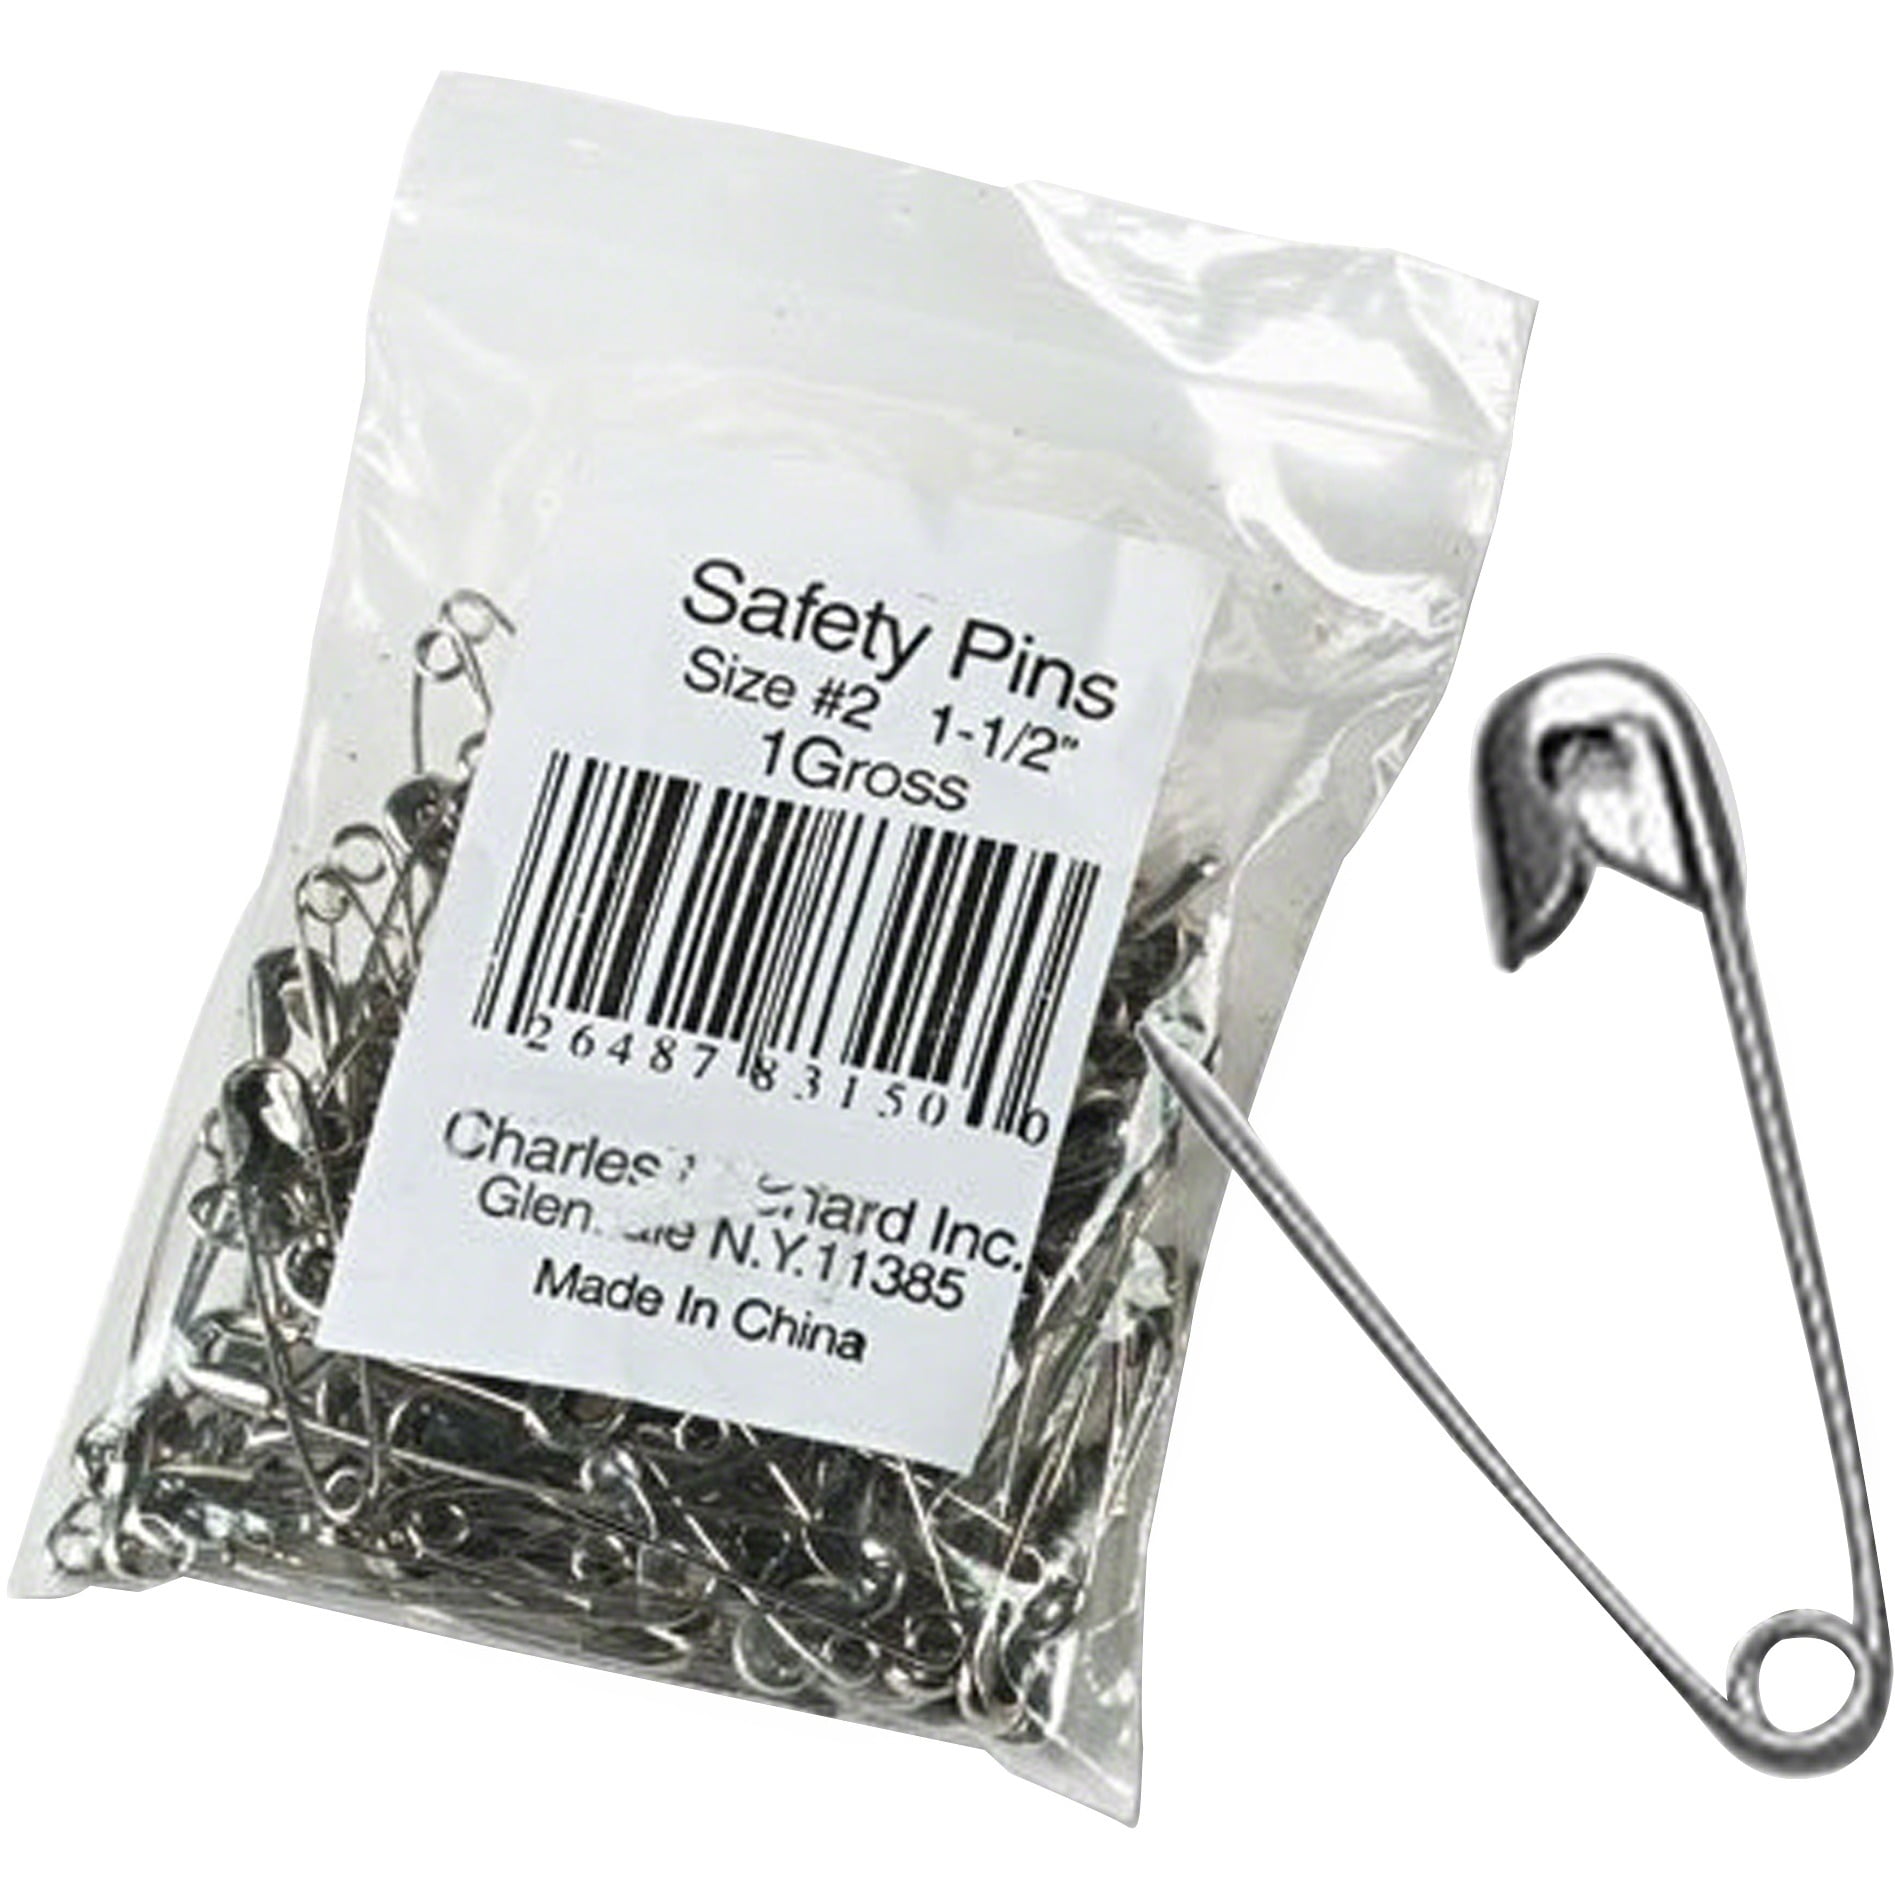 Coil-Less Curved Safety Pins Size 1 50/Pkg 072879030266